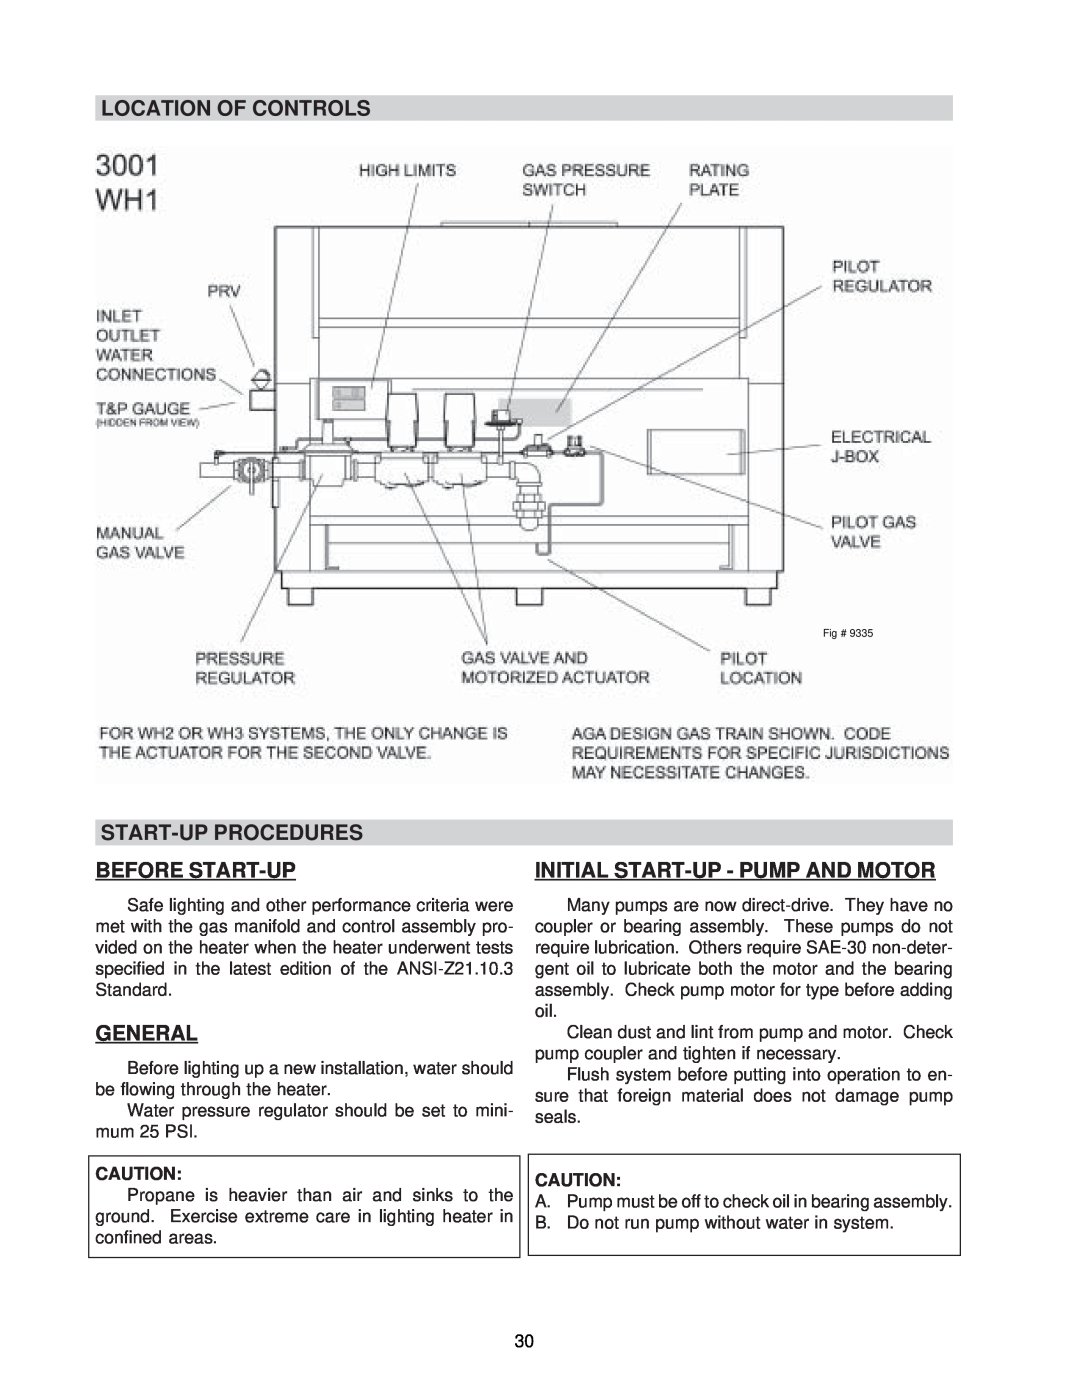 Raypak NH manual Start-Upprocedures Before Start-Up, Initial Start-Up- Pump And Motor, Location Of Controls, General 